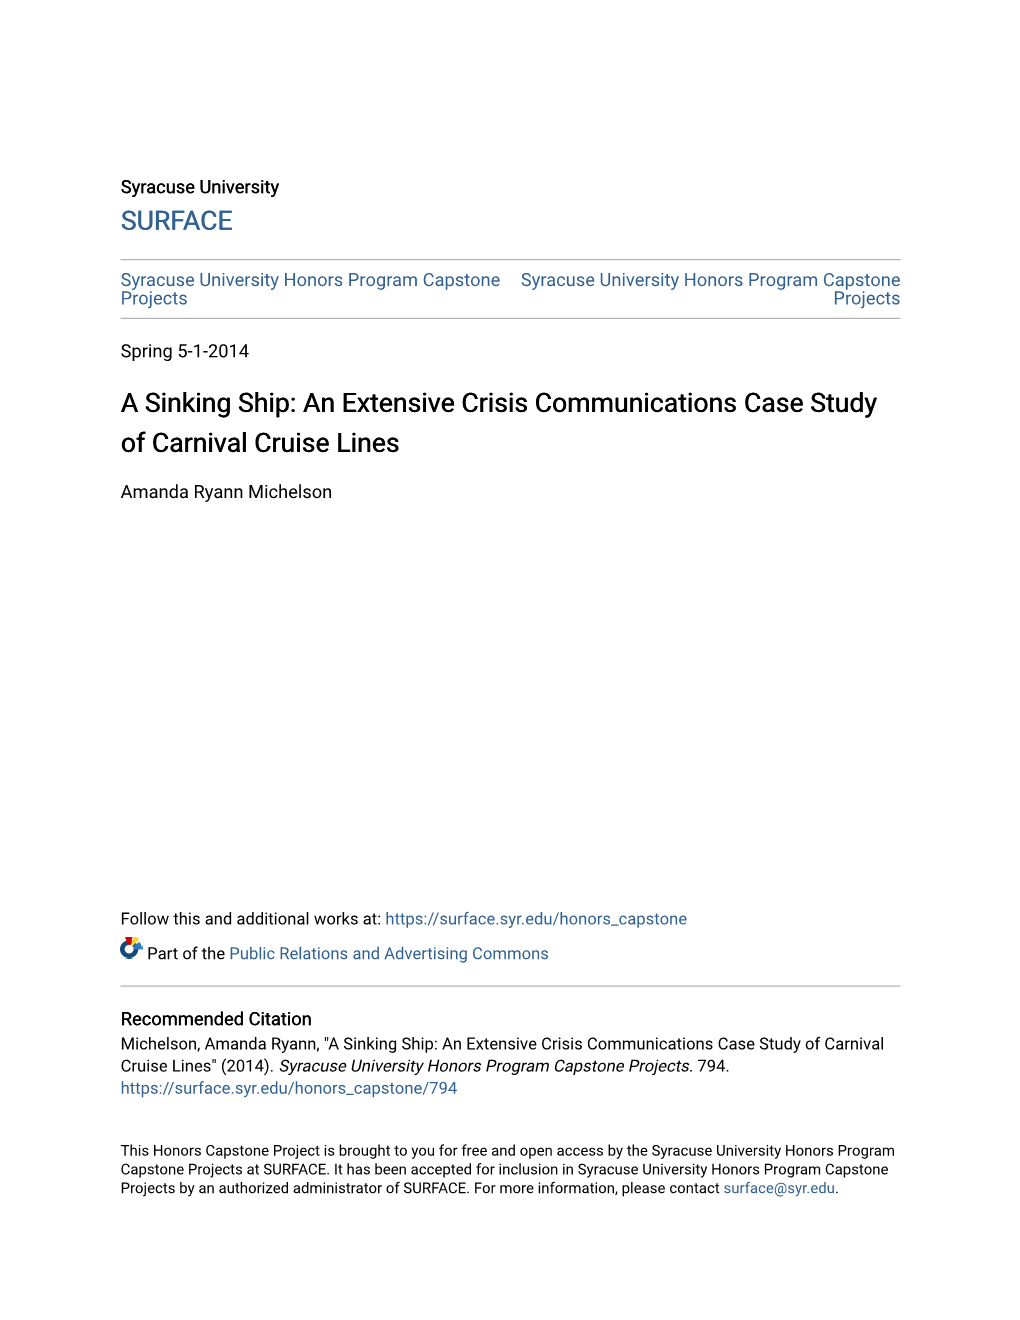 A Sinking Ship: an Extensive Crisis Communications Case Study of Carnival Cruise Lines